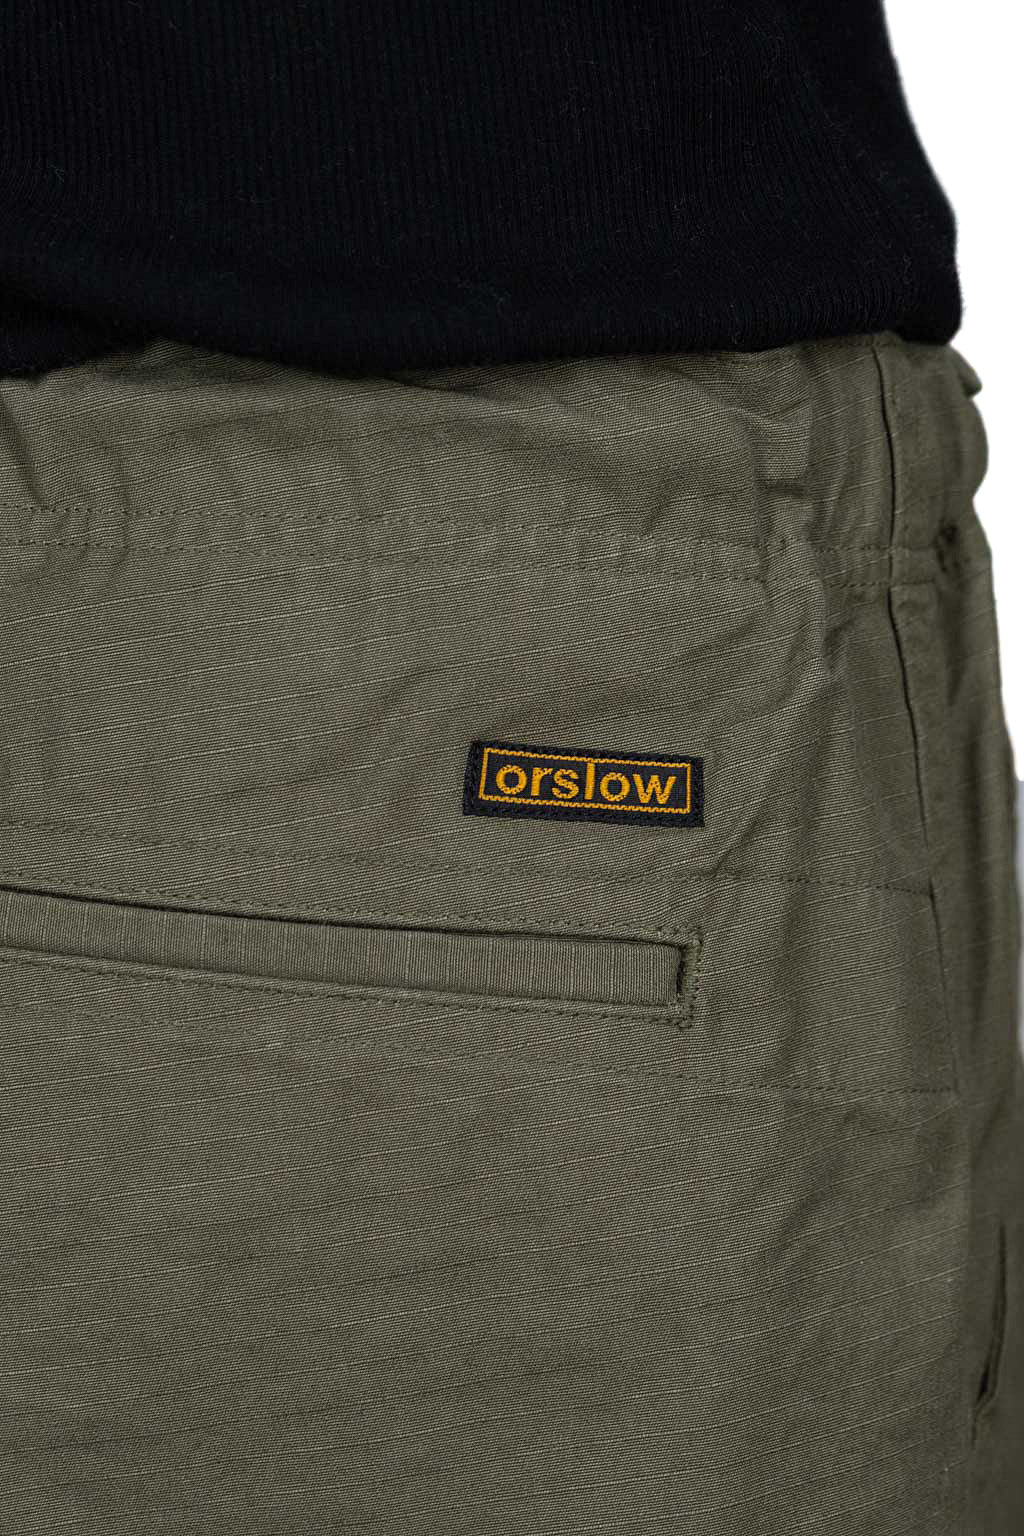 OrSlow New York Shorts - Army